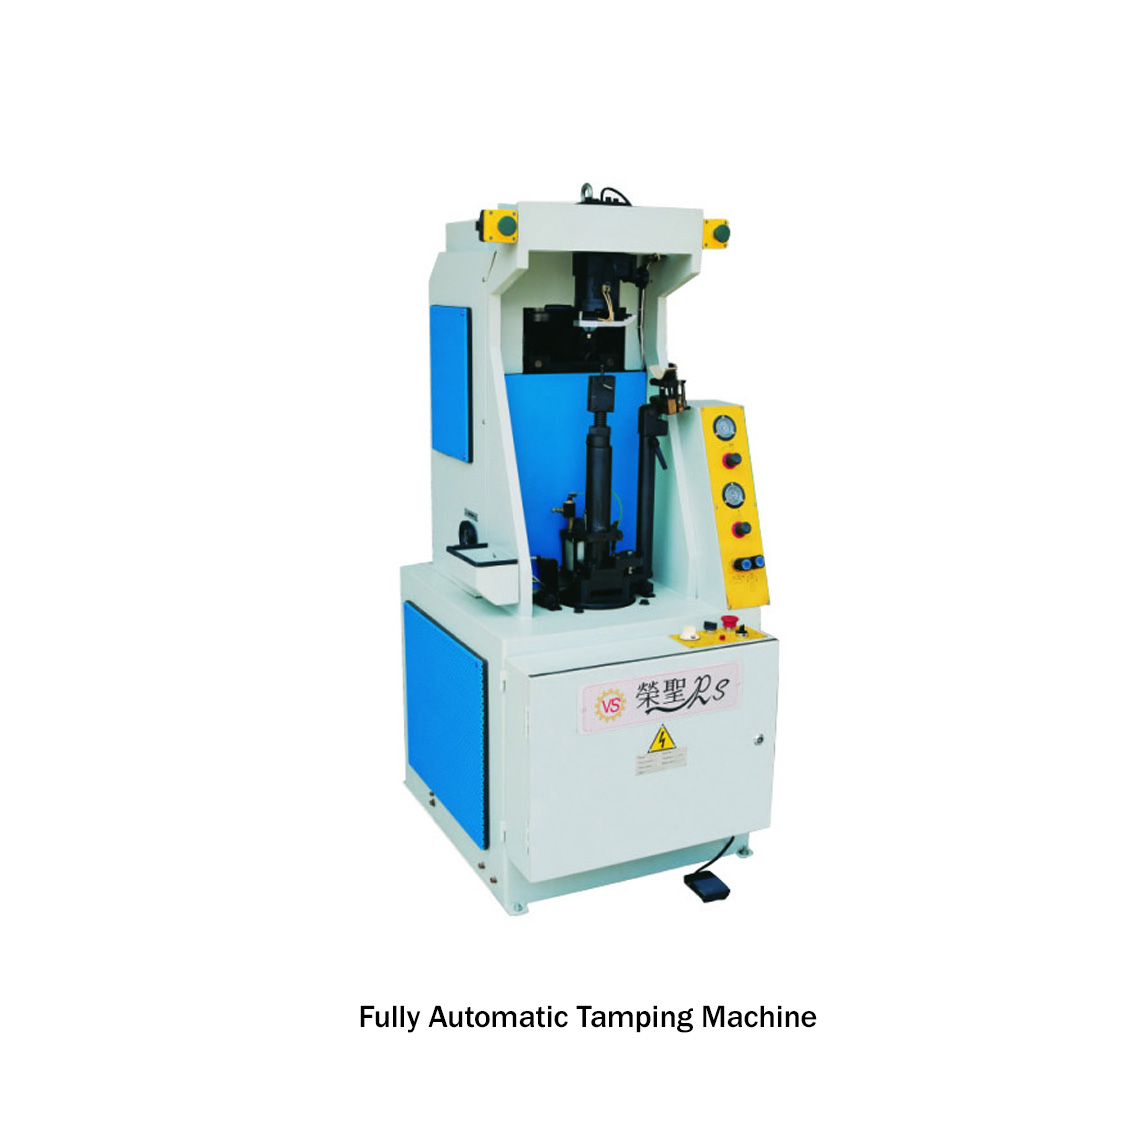 Fully Automatic Tamping Machine